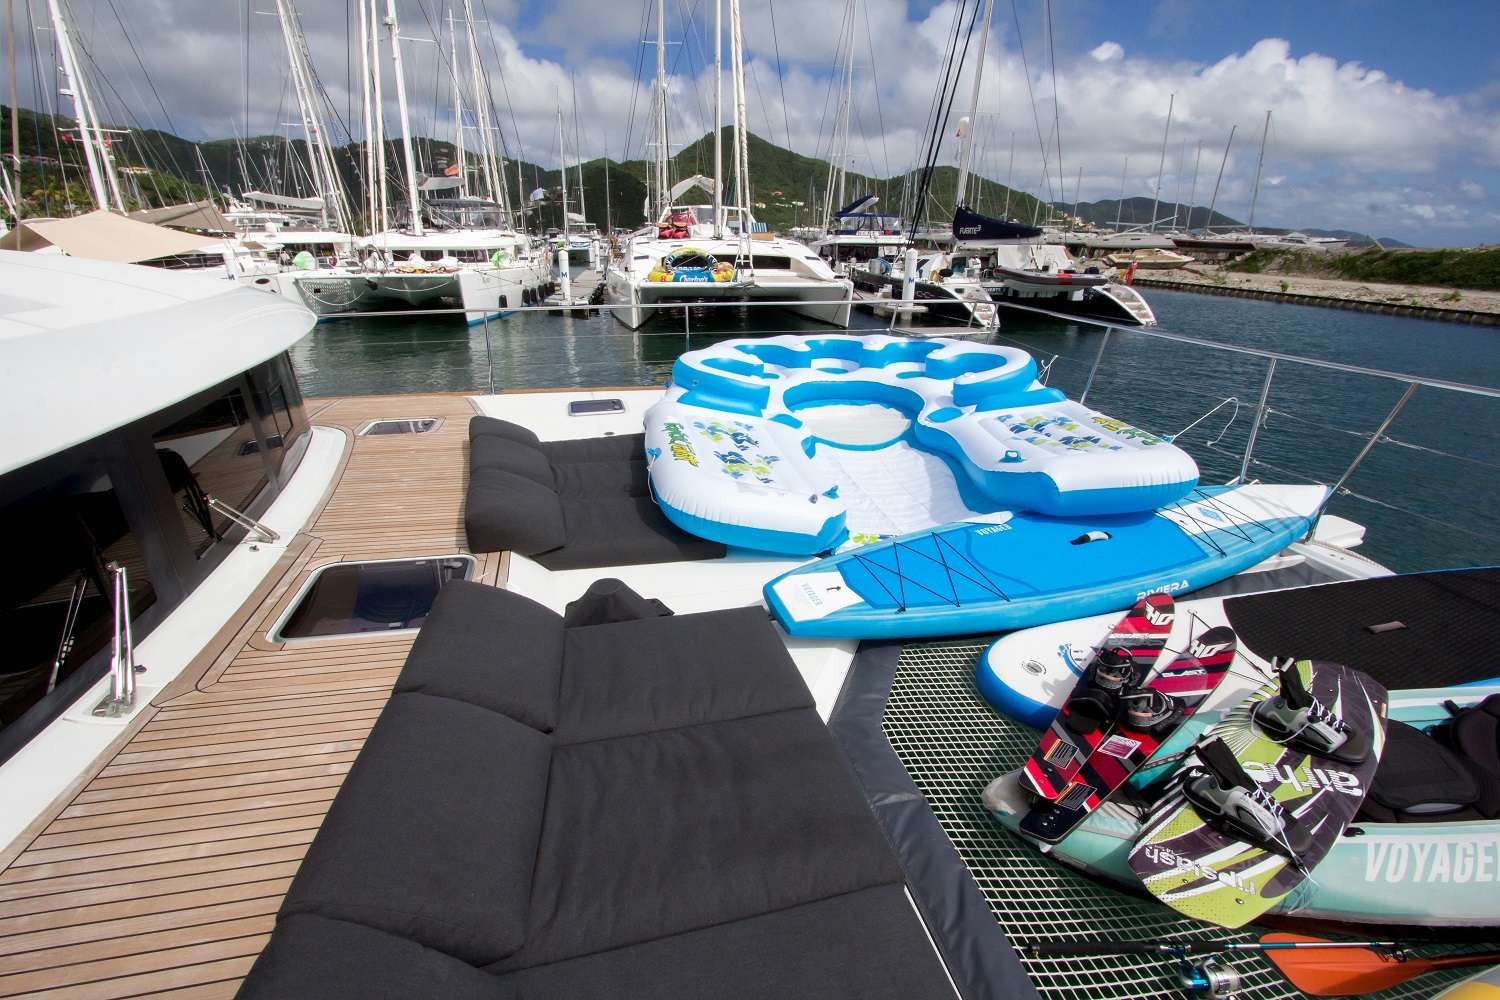 JAN'S FELION Yacht Charter - Loaded with watersports